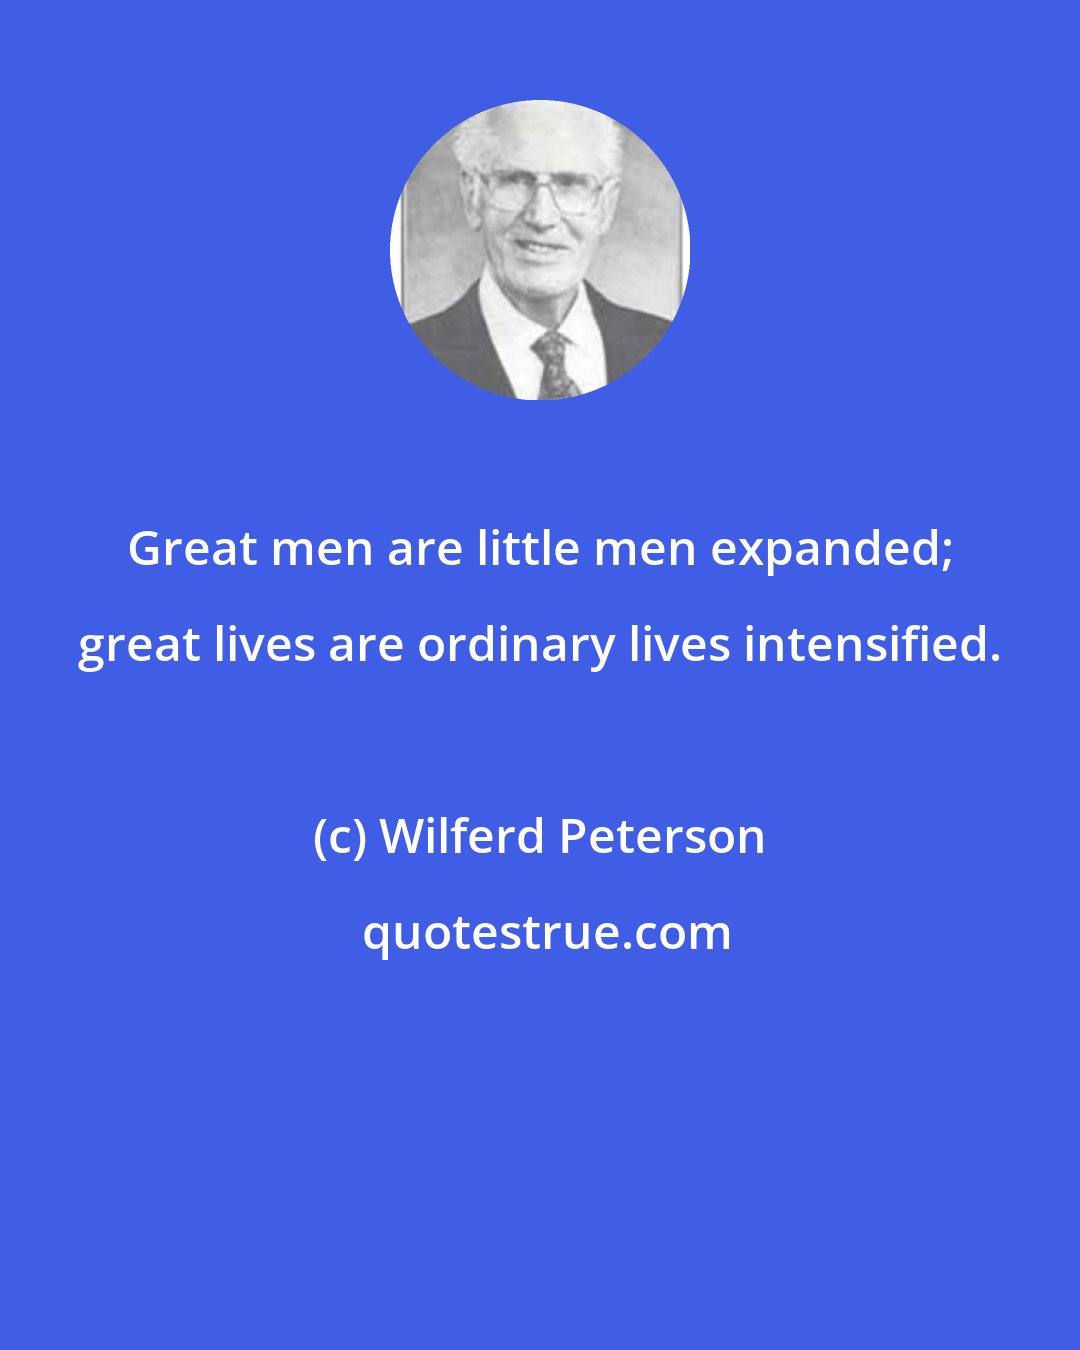 Wilferd Peterson: Great men are little men expanded; great lives are ordinary lives intensified.